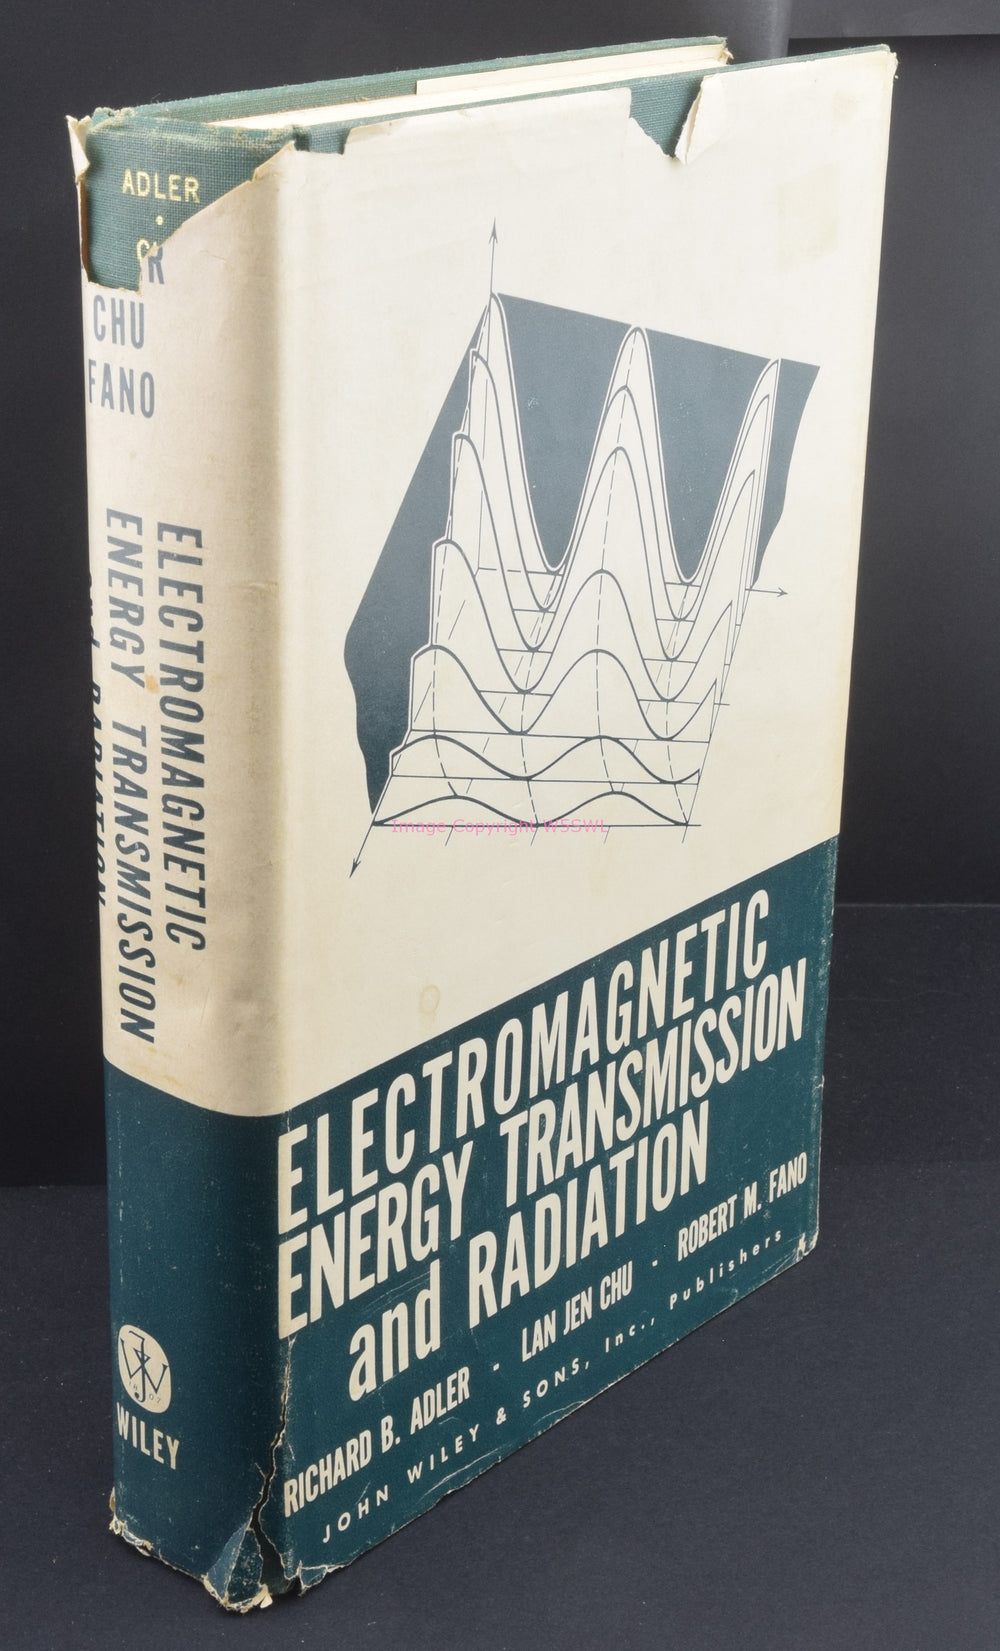 Electromagnetic Energy Transmission and Radiation - MIT Core Curriculum Program - Dave's Hobby Shop by W5SWL